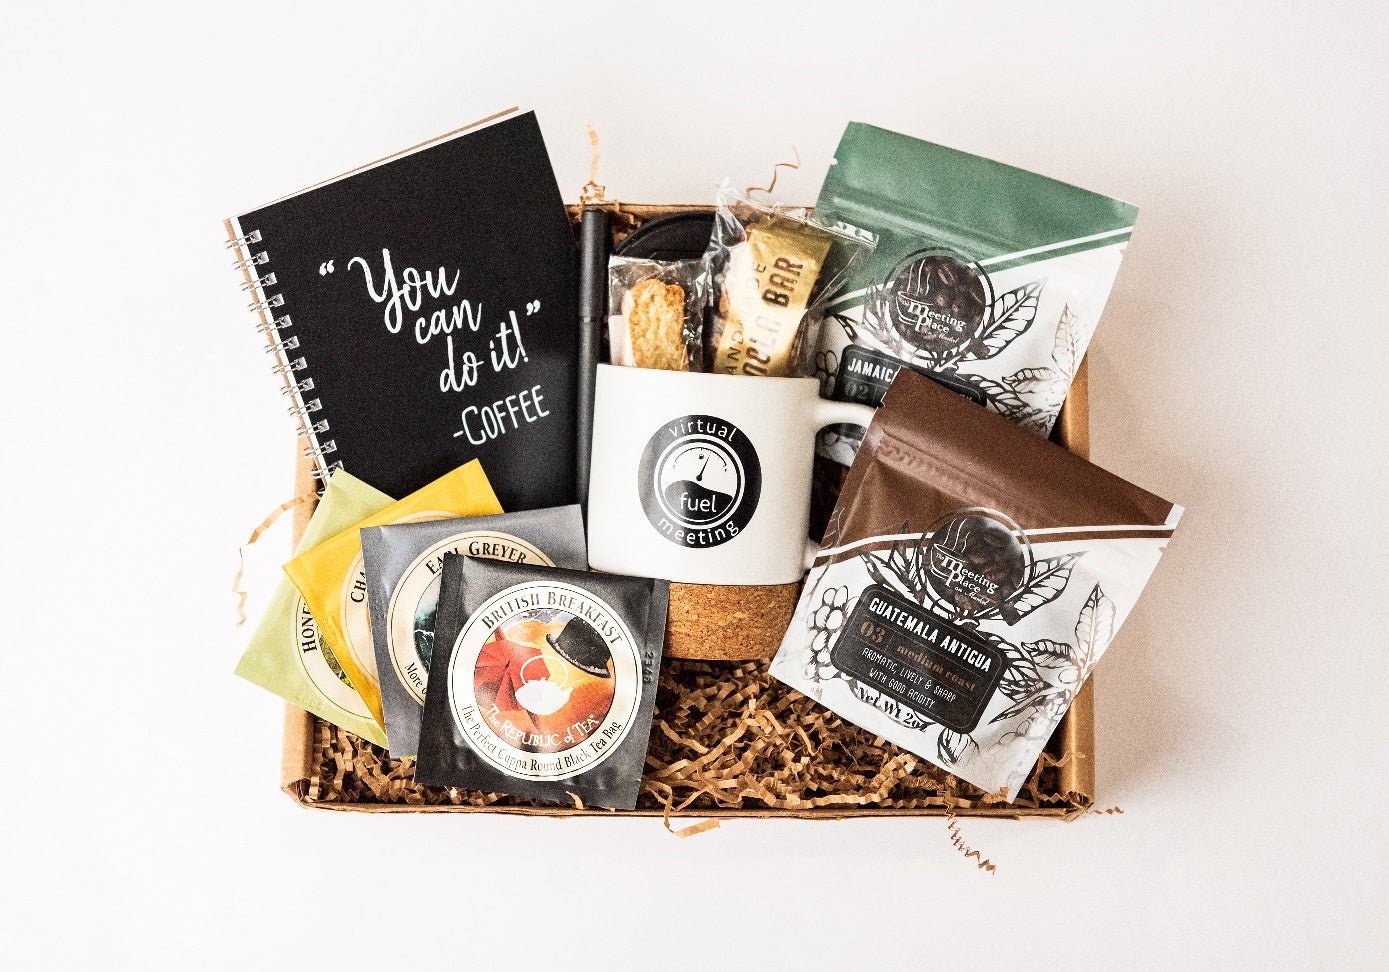 New Hire Gift Boxes - The Meeting Place on Market